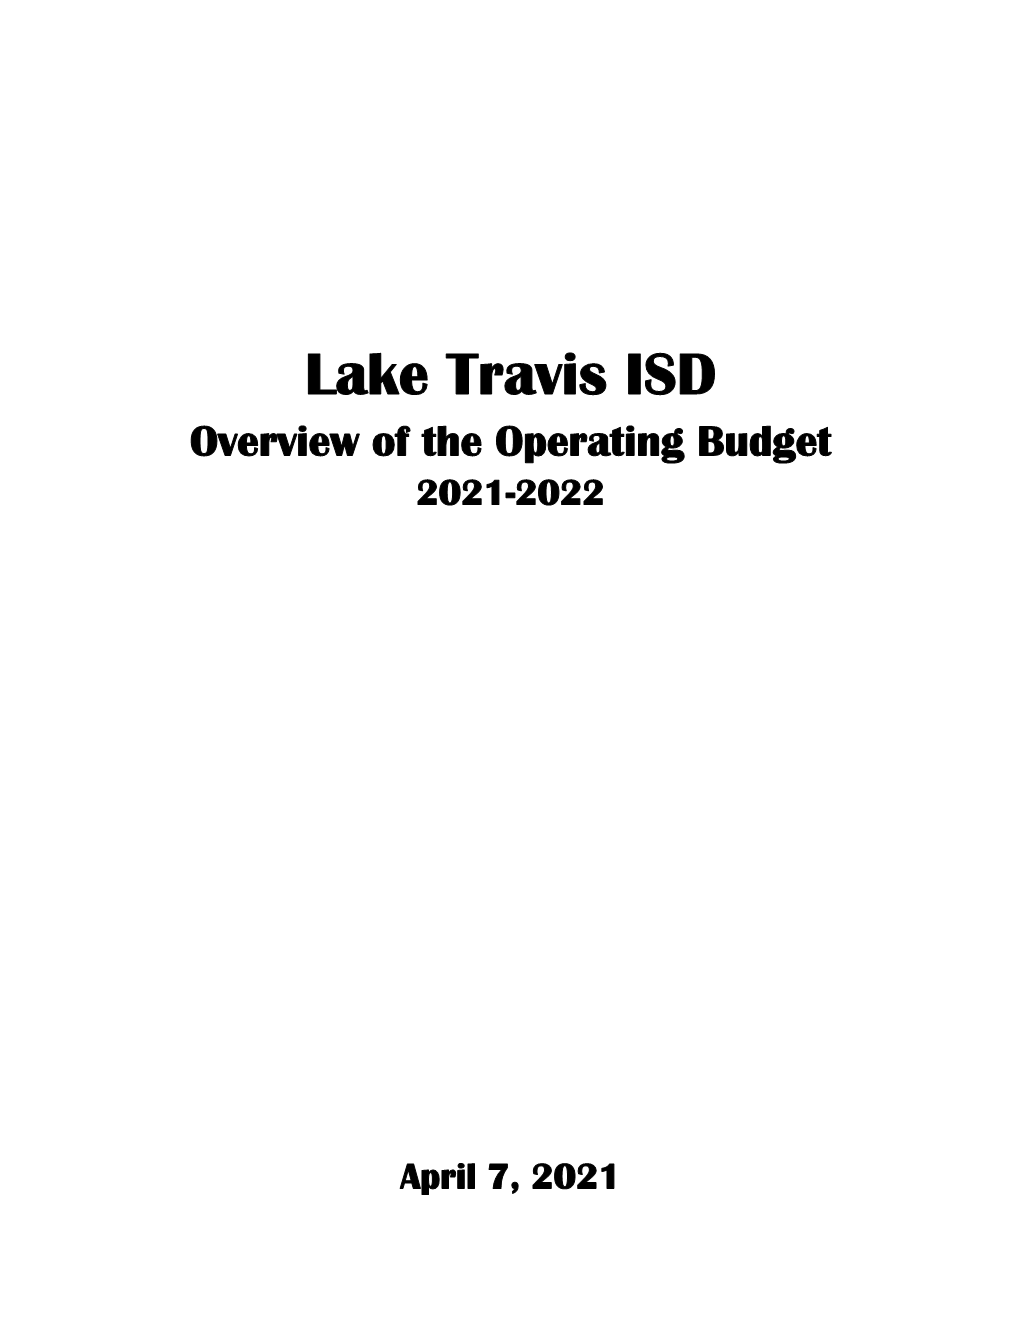 Overview of Operating Budget, April 7, 2021